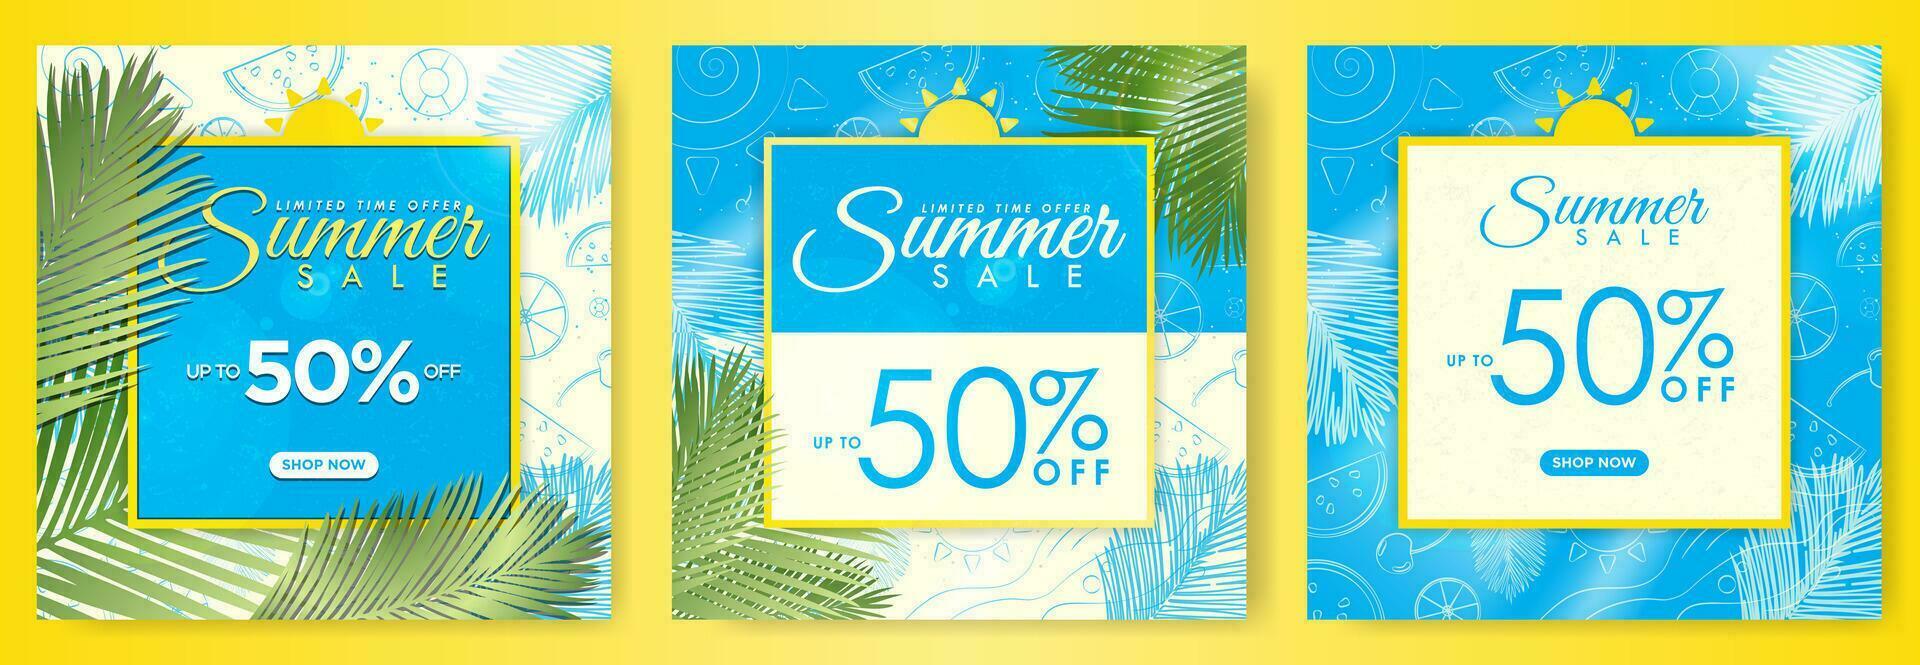 Limited Time Offer Summer Sale Signs. Colorful Summer Sale poster with up to 50 off text tag and shop now button. Simple yet colorful summer sale concept. Palm leaves, hand drawn tropical elements. vector